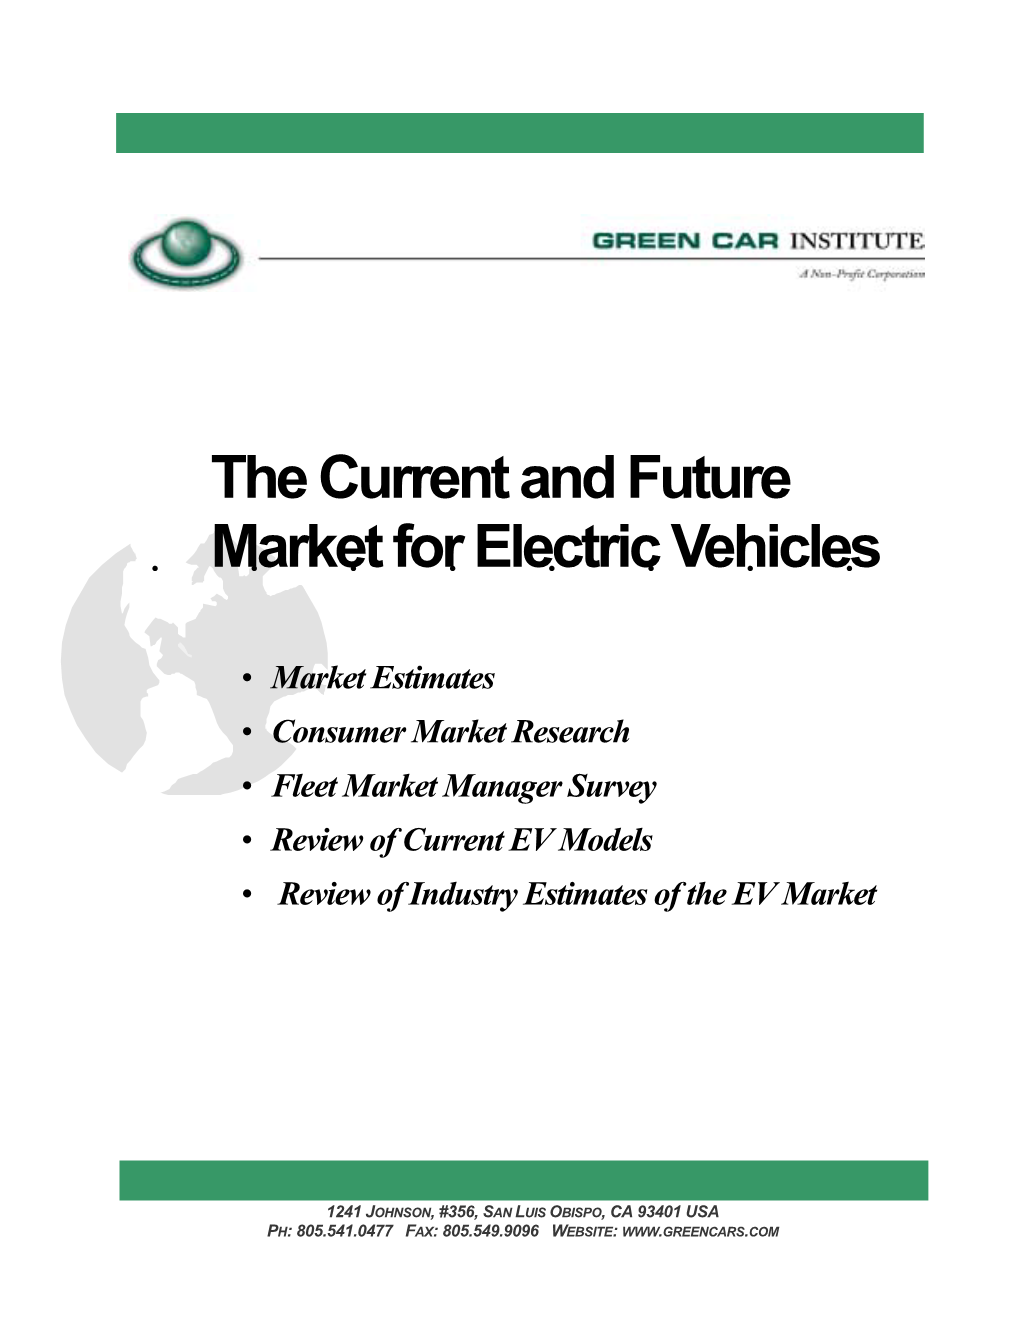 The Current and Future Market for Electric Vehicles